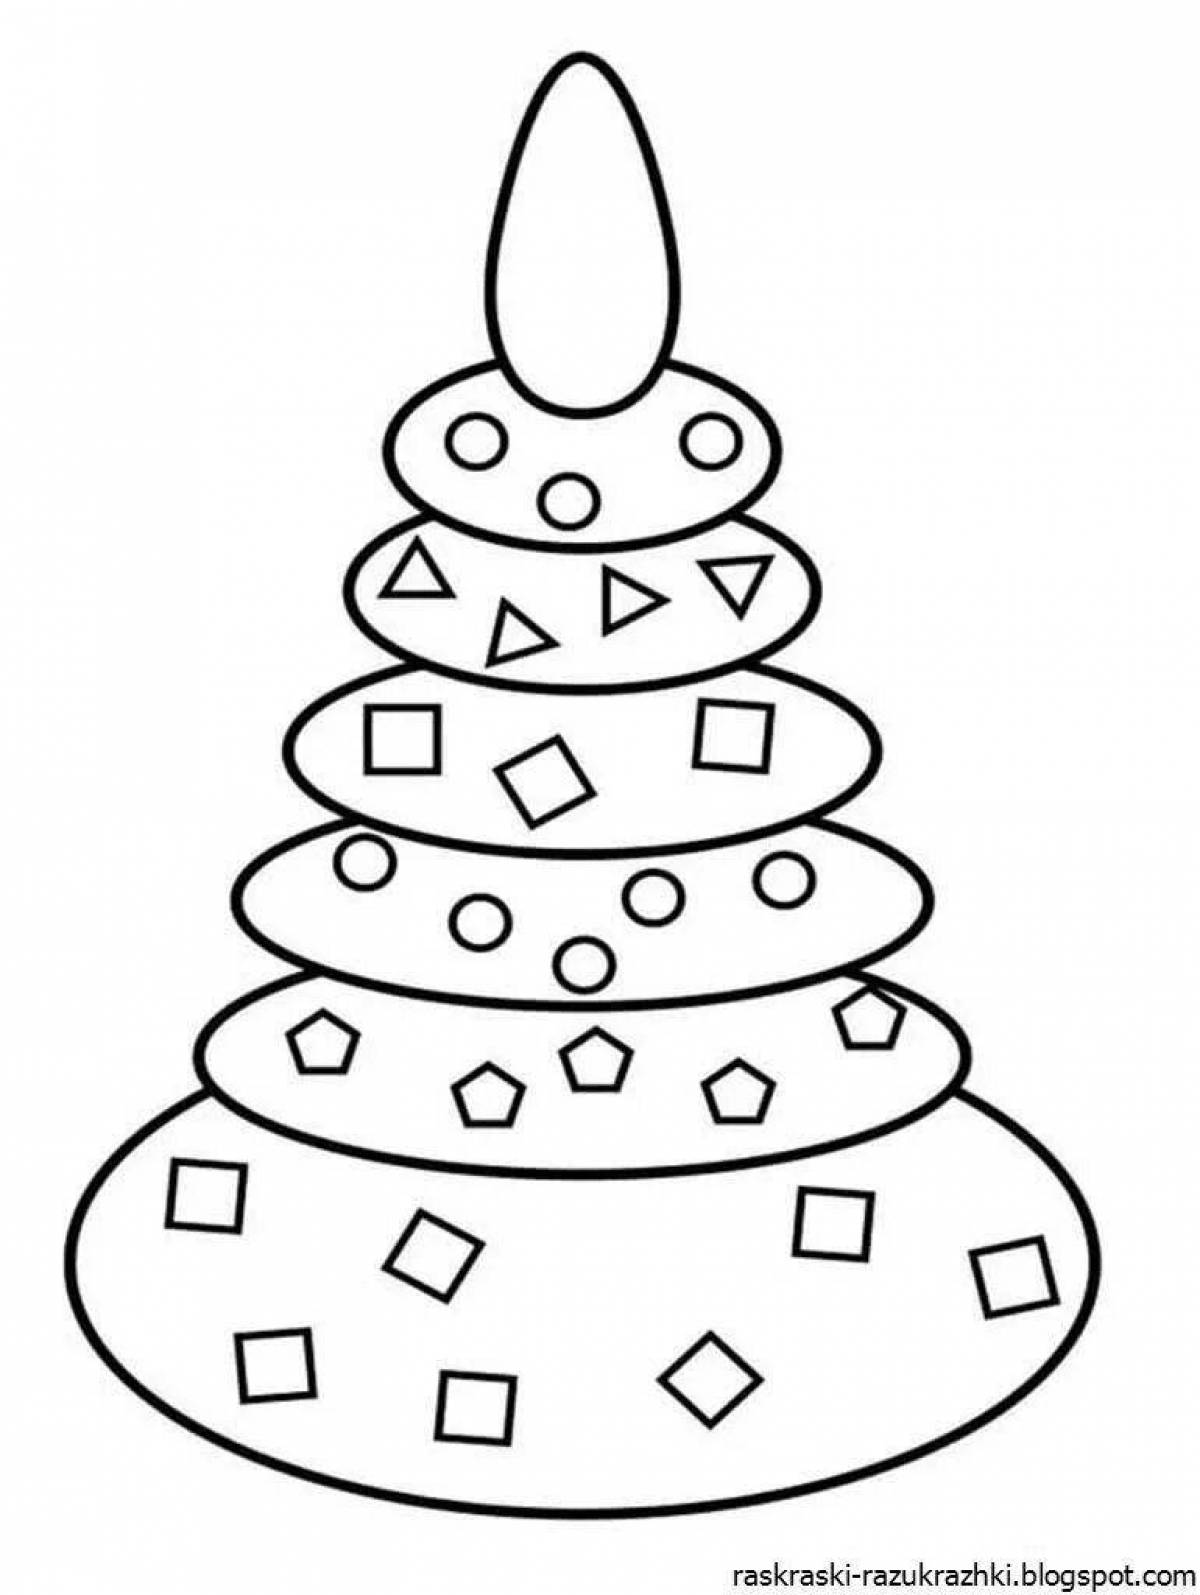 Joyful coloring pyramid for children 3-4 years old